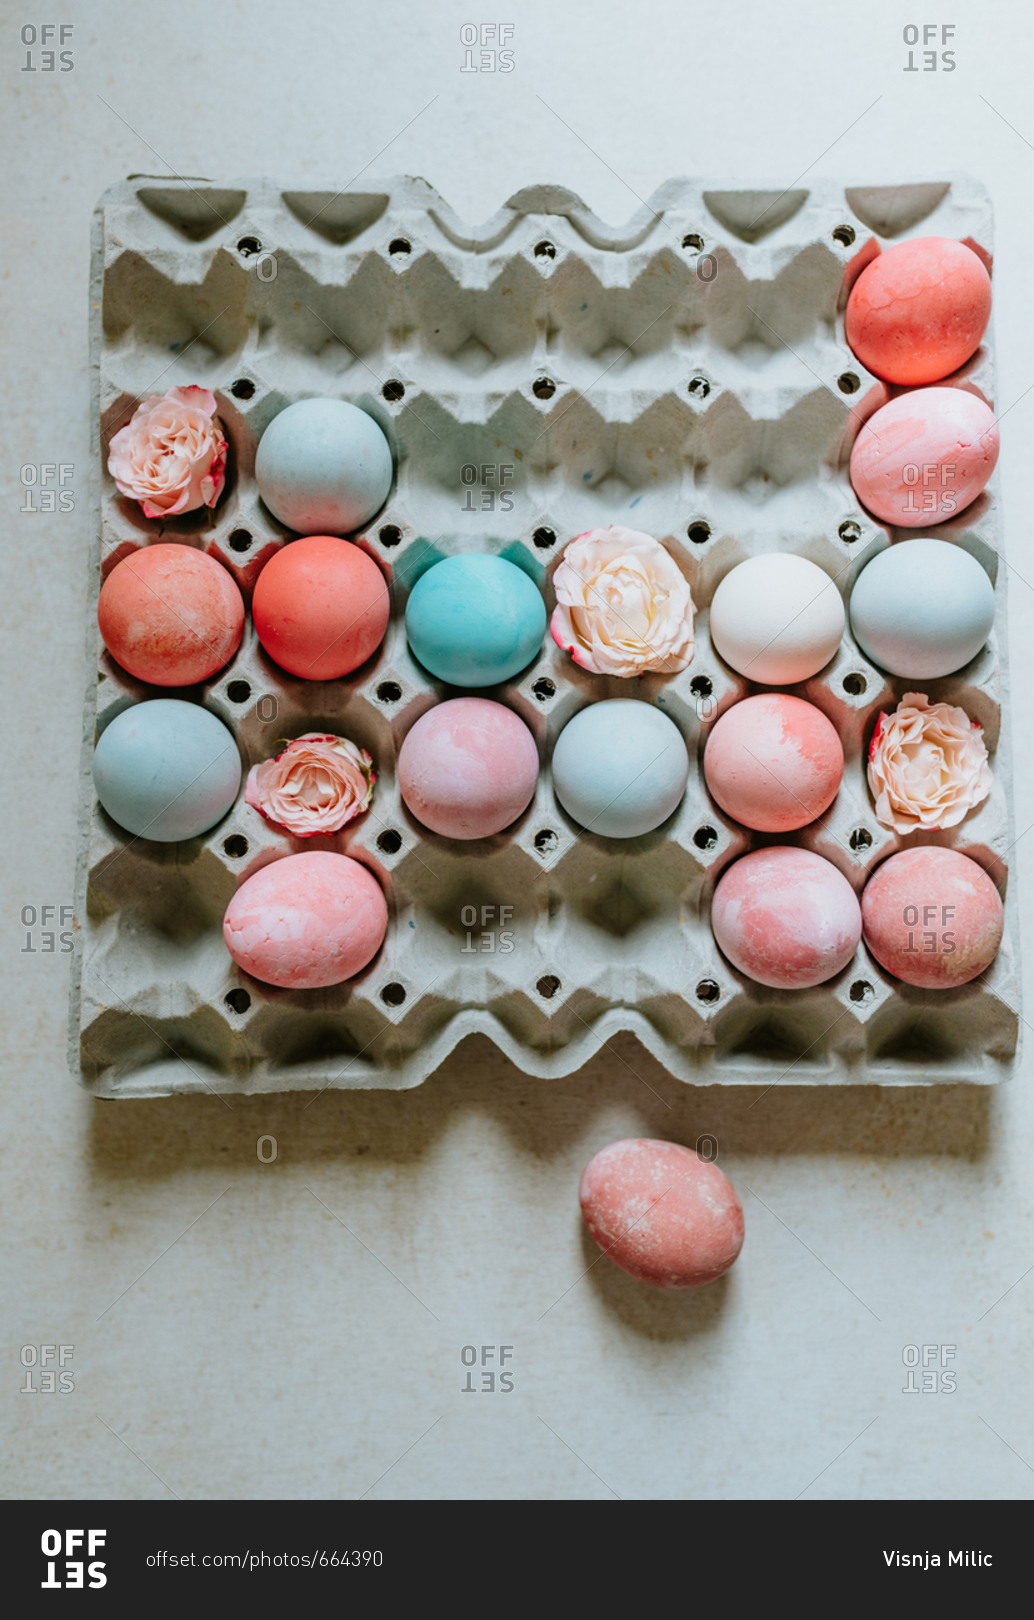 Flatlay shot of pastel pink and turquoise Easter eggs in carton